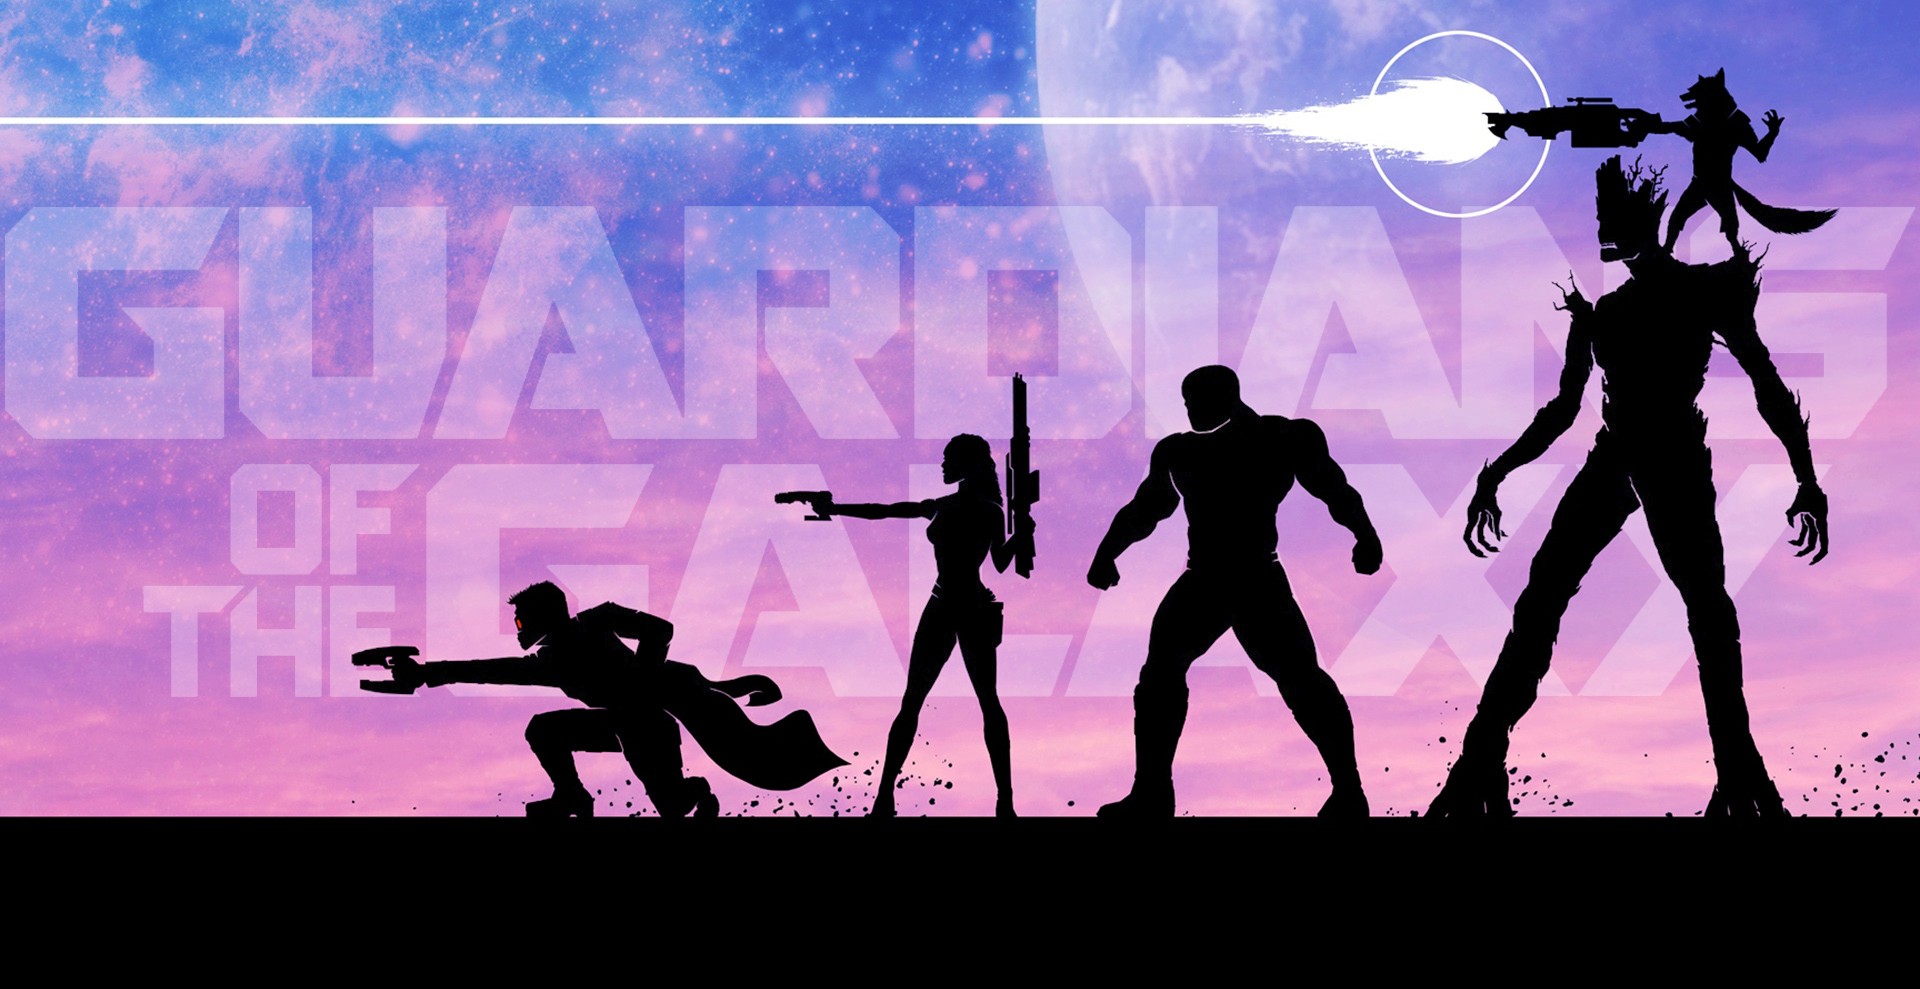 Guardians Of The Galaxy, Star Lord, Gamora, Drax The Destroyer, Groot, Rocket Raccoon Wallpaper